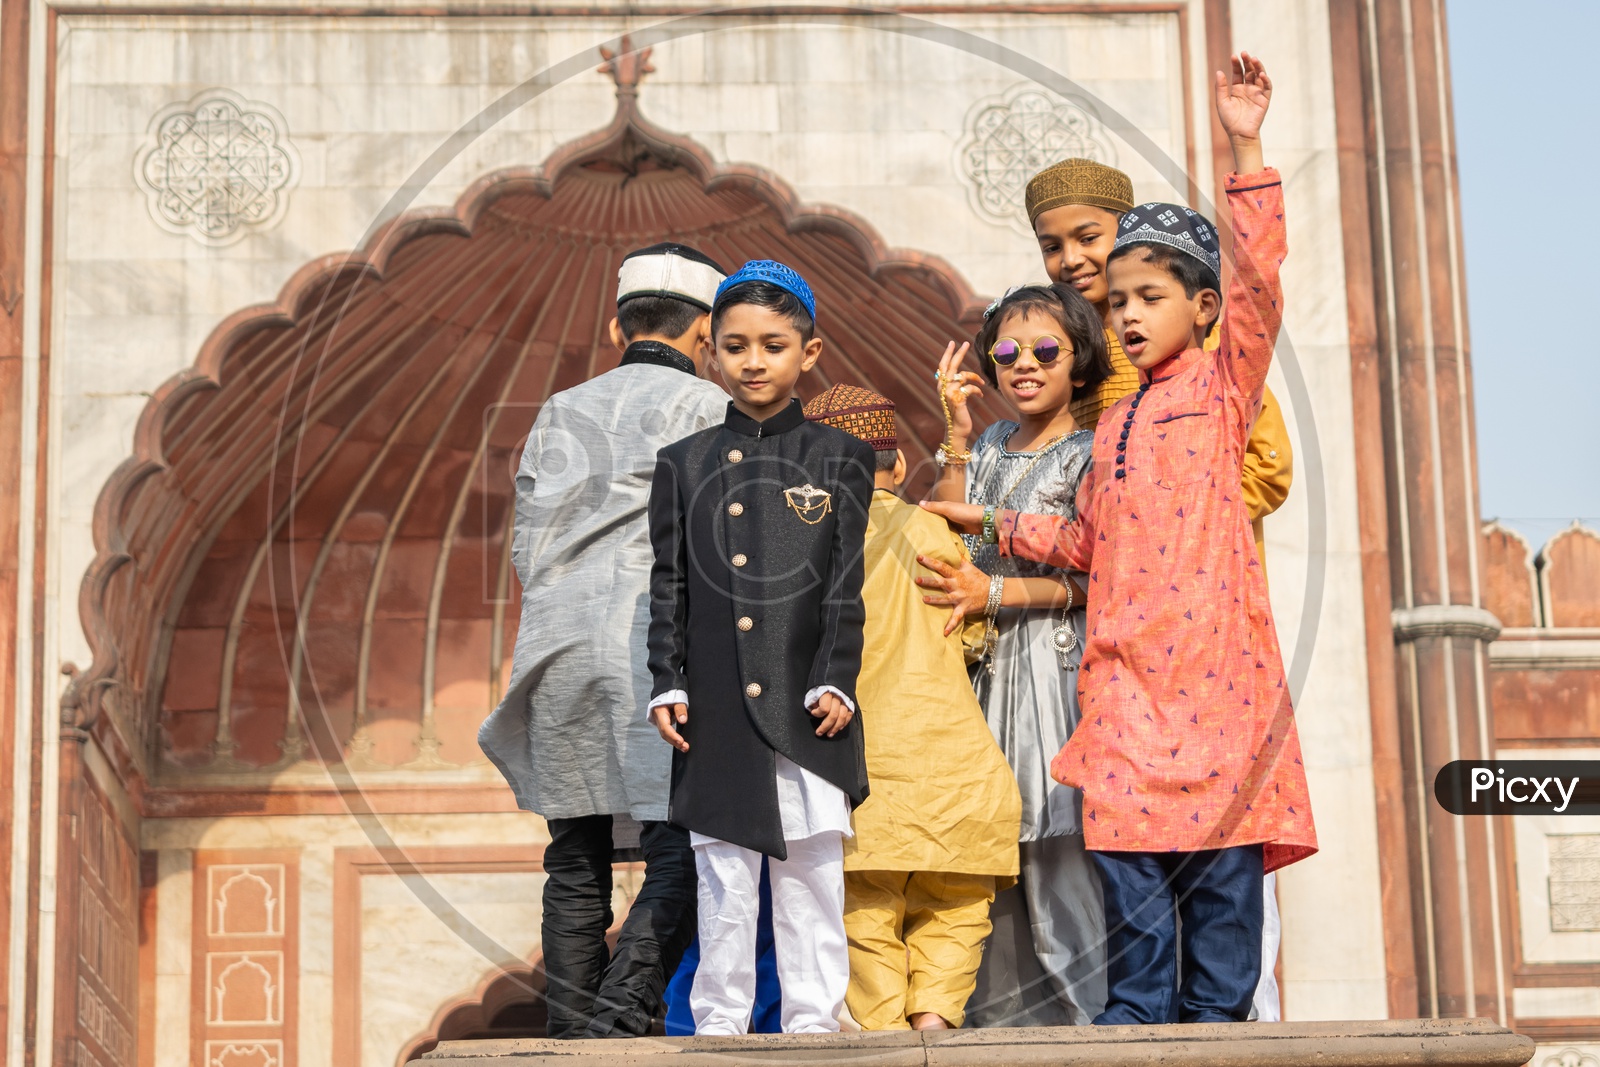 Children posing for photos on the day of Eid-ul-Fitr (End of the holy month of Ramadan) at Jama Masjid, Delhi